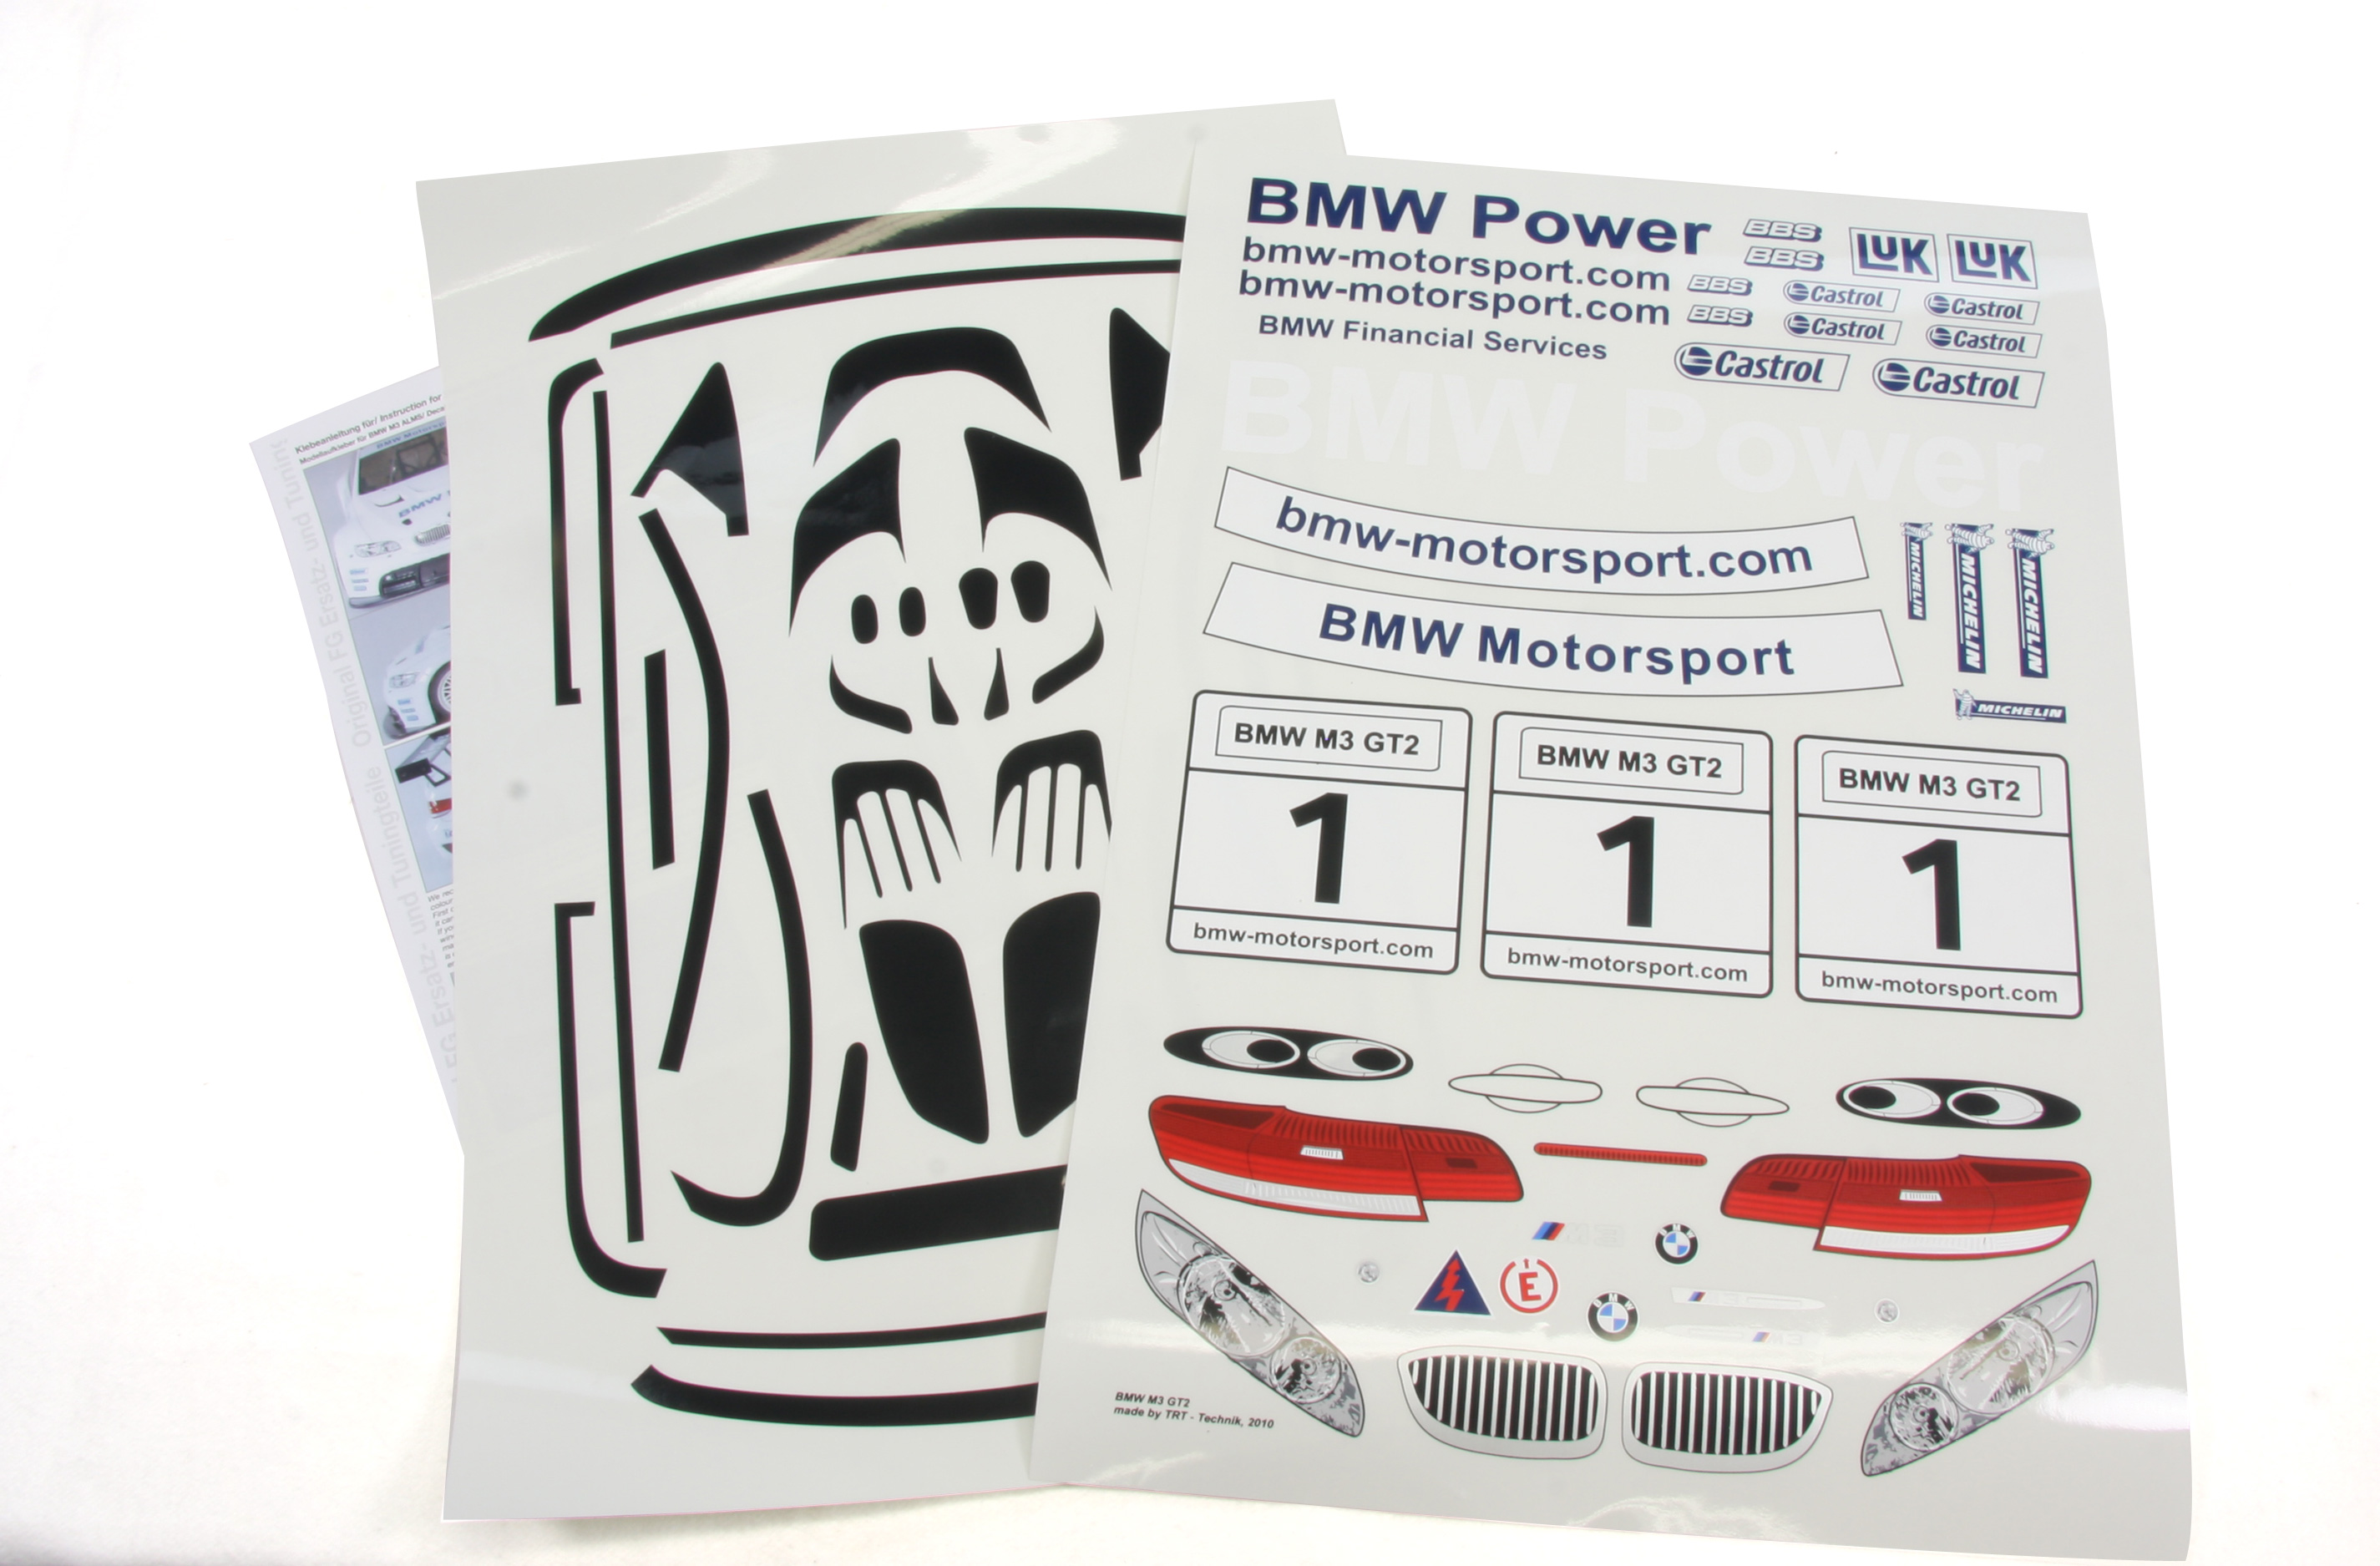 8185/01 FG Vehicle decals set for BMW M3 ALMS